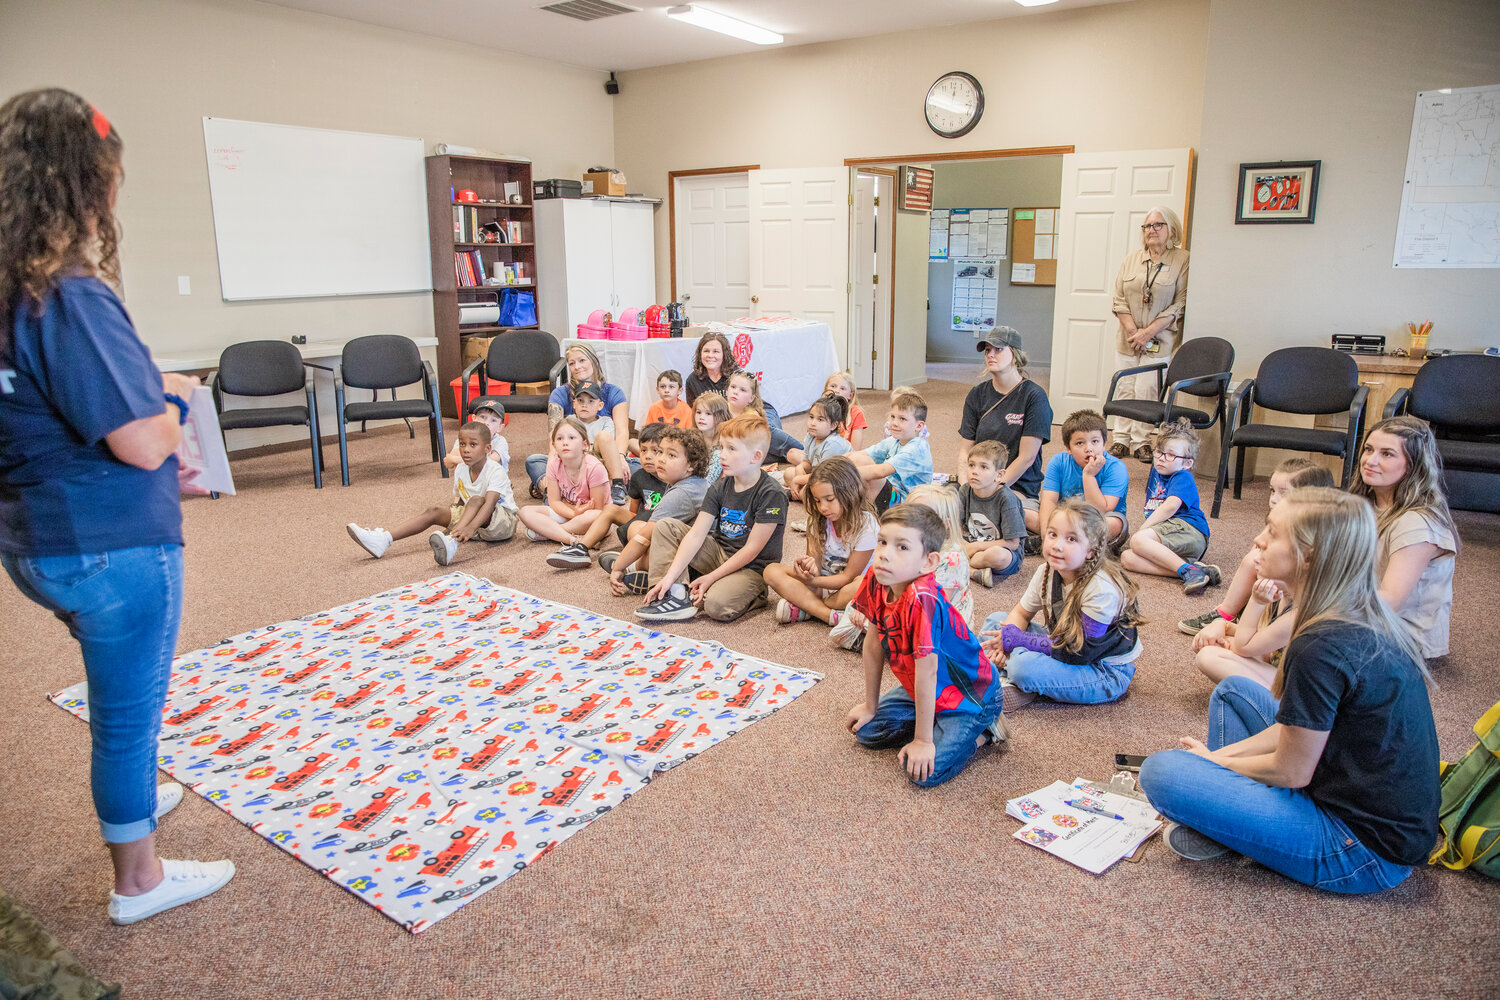 Kindergarten students listen to a presentation during a visit to Lewis County Fire District 5 in Napavine on Tuesday, June 7.